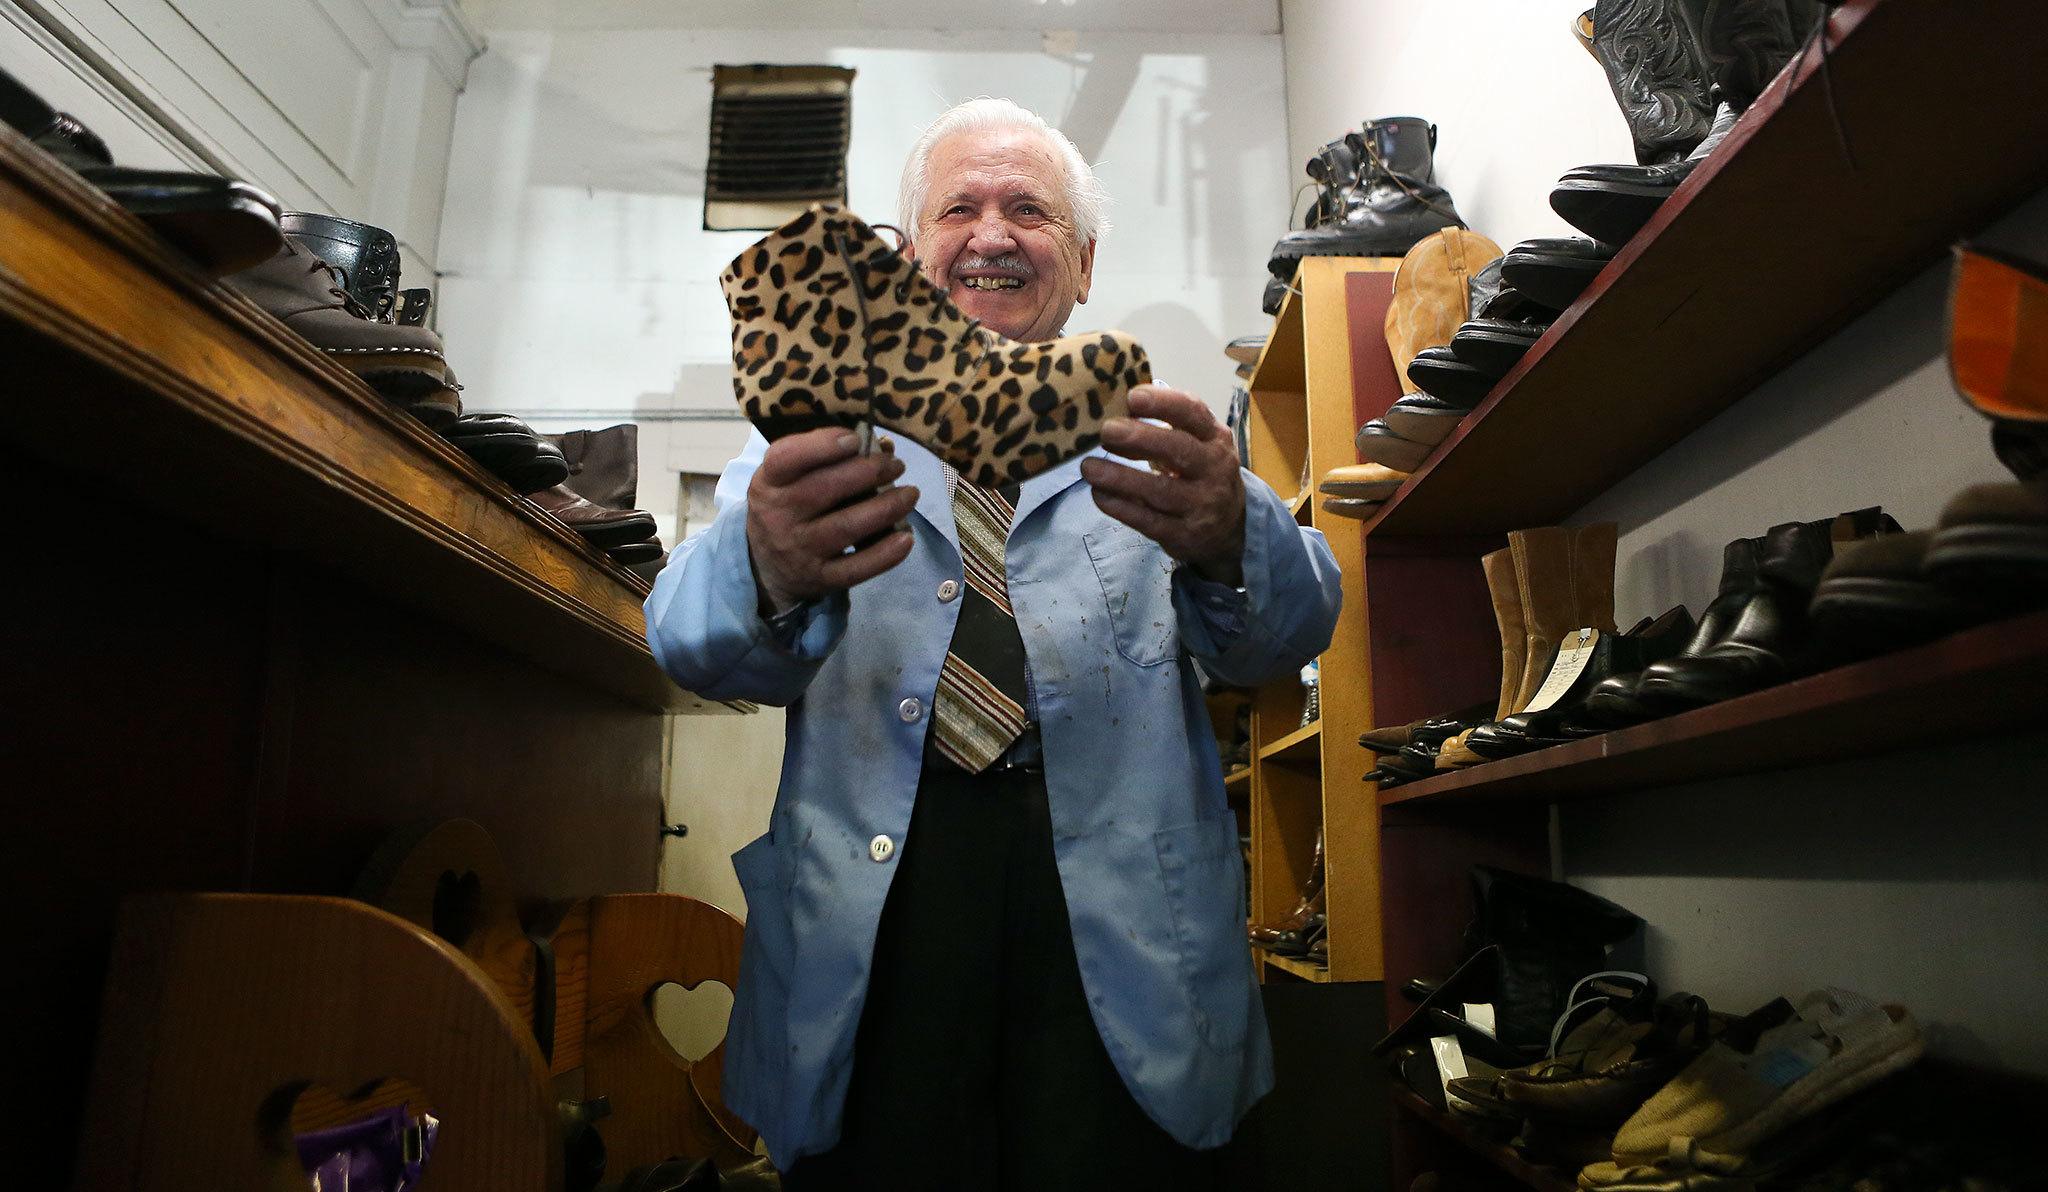 Mike Papadimitriou, owner of People’s Shoe Repair, holds up a leopard print high heel shoe left behind by a customer. Papadimitriou has been the sole proprietor since 1968. (Andy Bronson / The Herald)